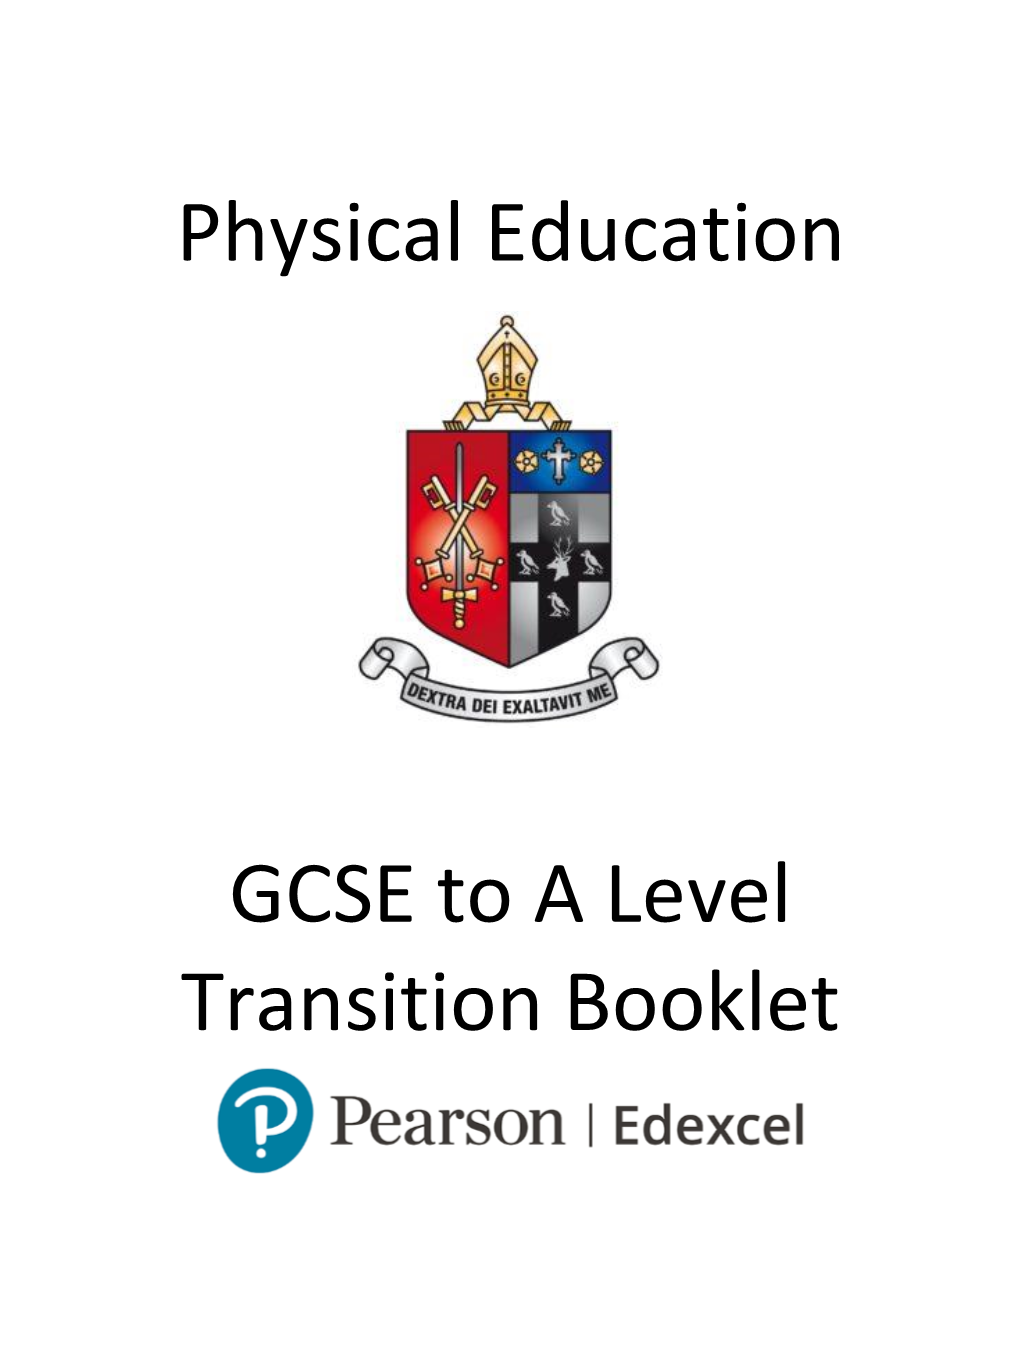 Physical Education GCSE to a Level Transition Booklet